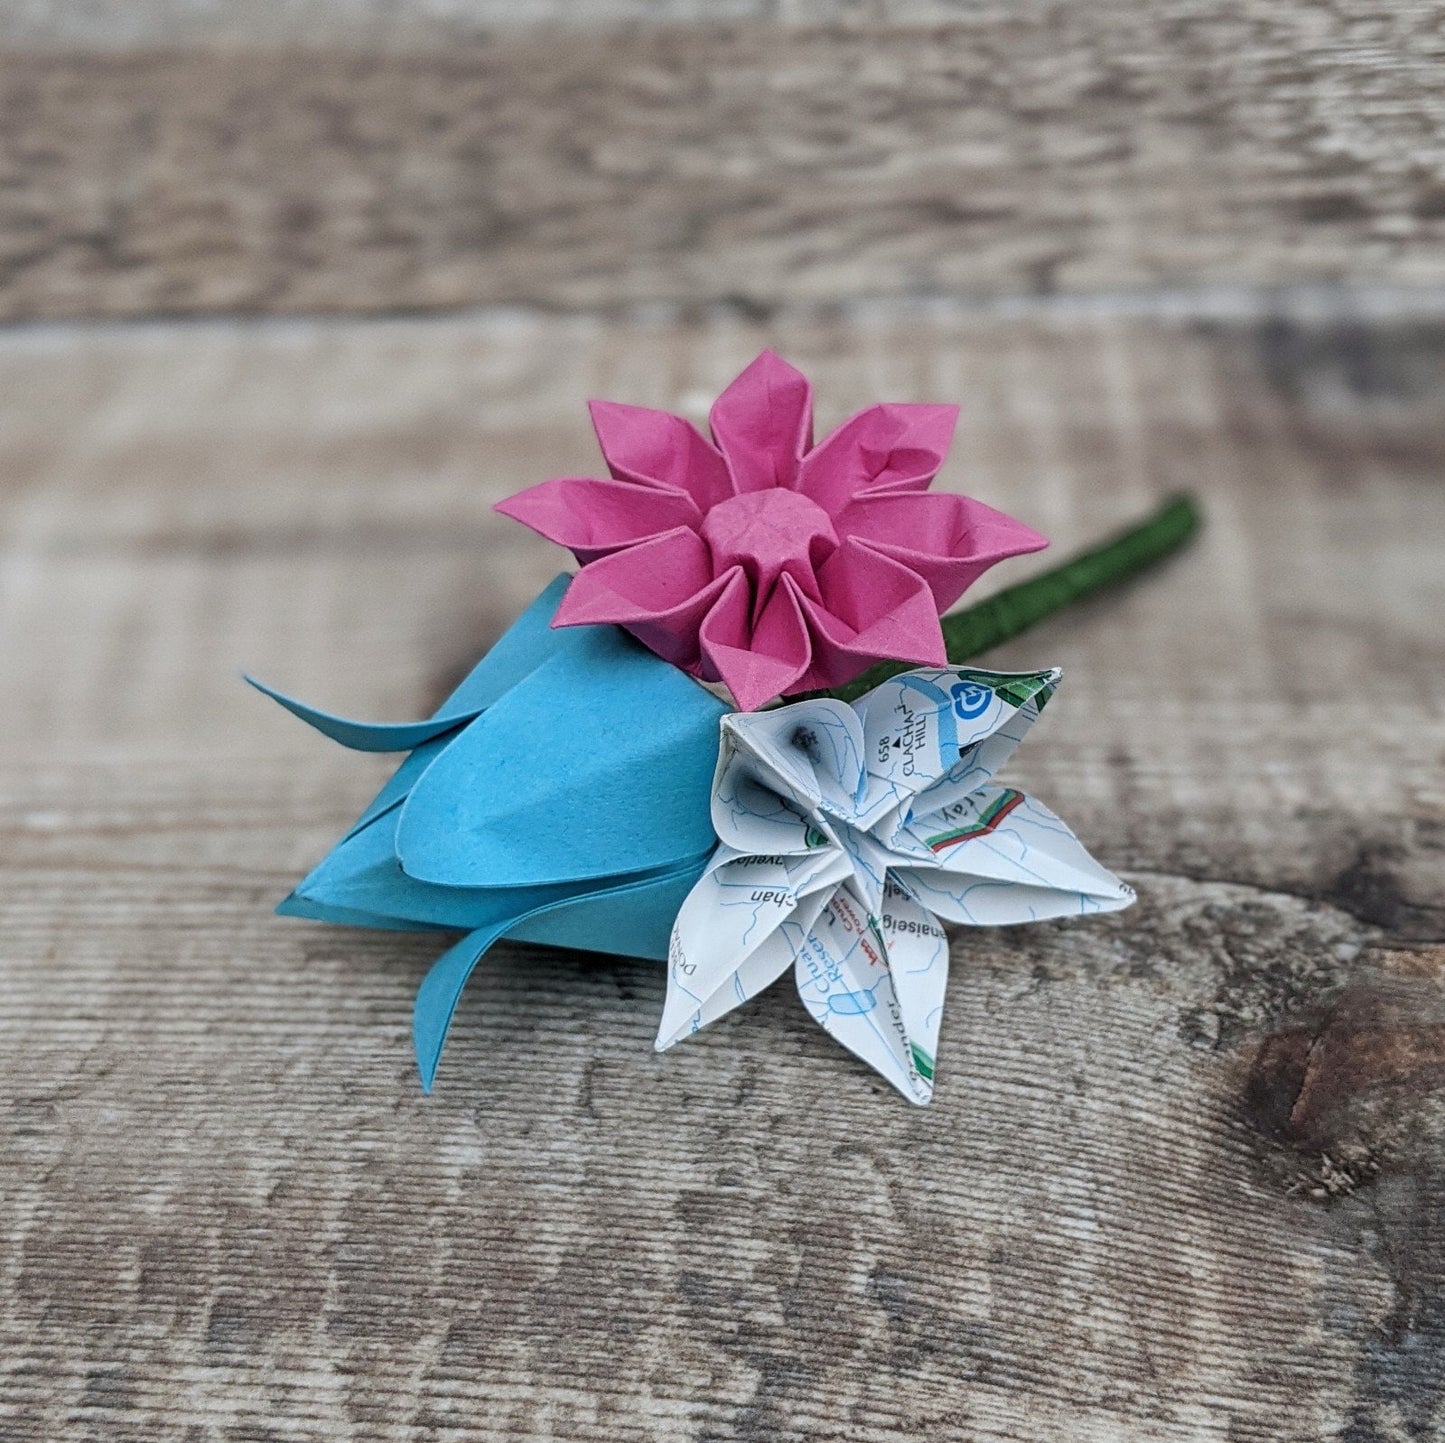 Alternative groom's map paper origami buttonhole / boutonniere